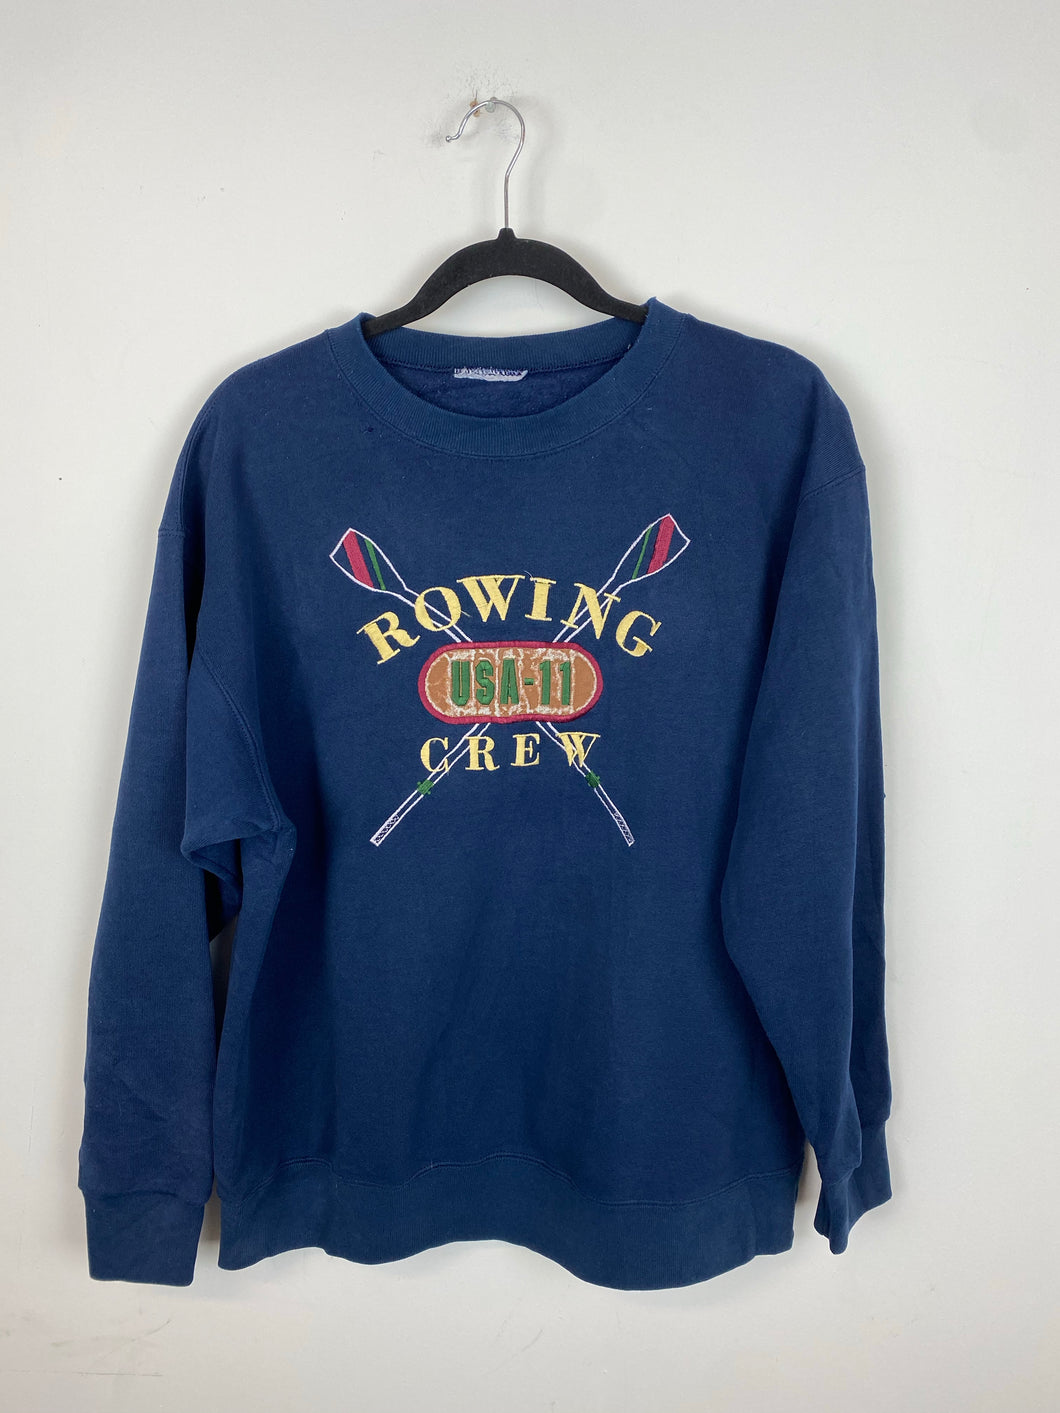 90s embroidered Rowing crew crewneck - XS/S